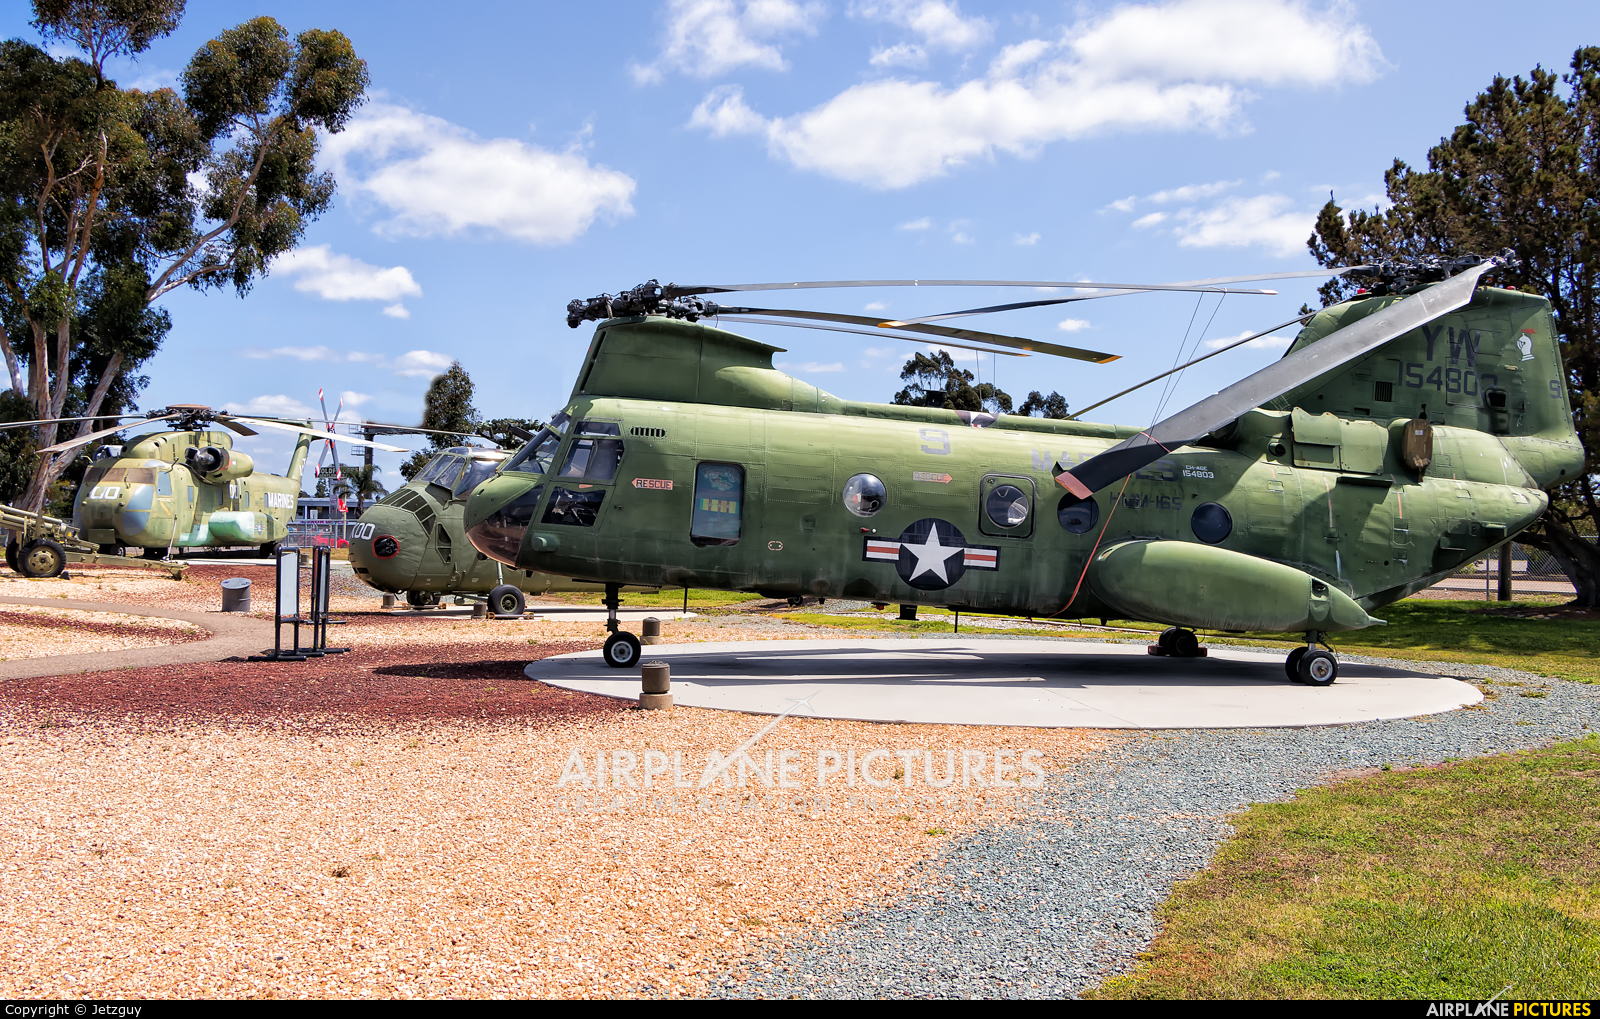 USA - Marine Corps 154803 aircraft at Miramar MCAS - Flying Leatherneck Aviation Museum